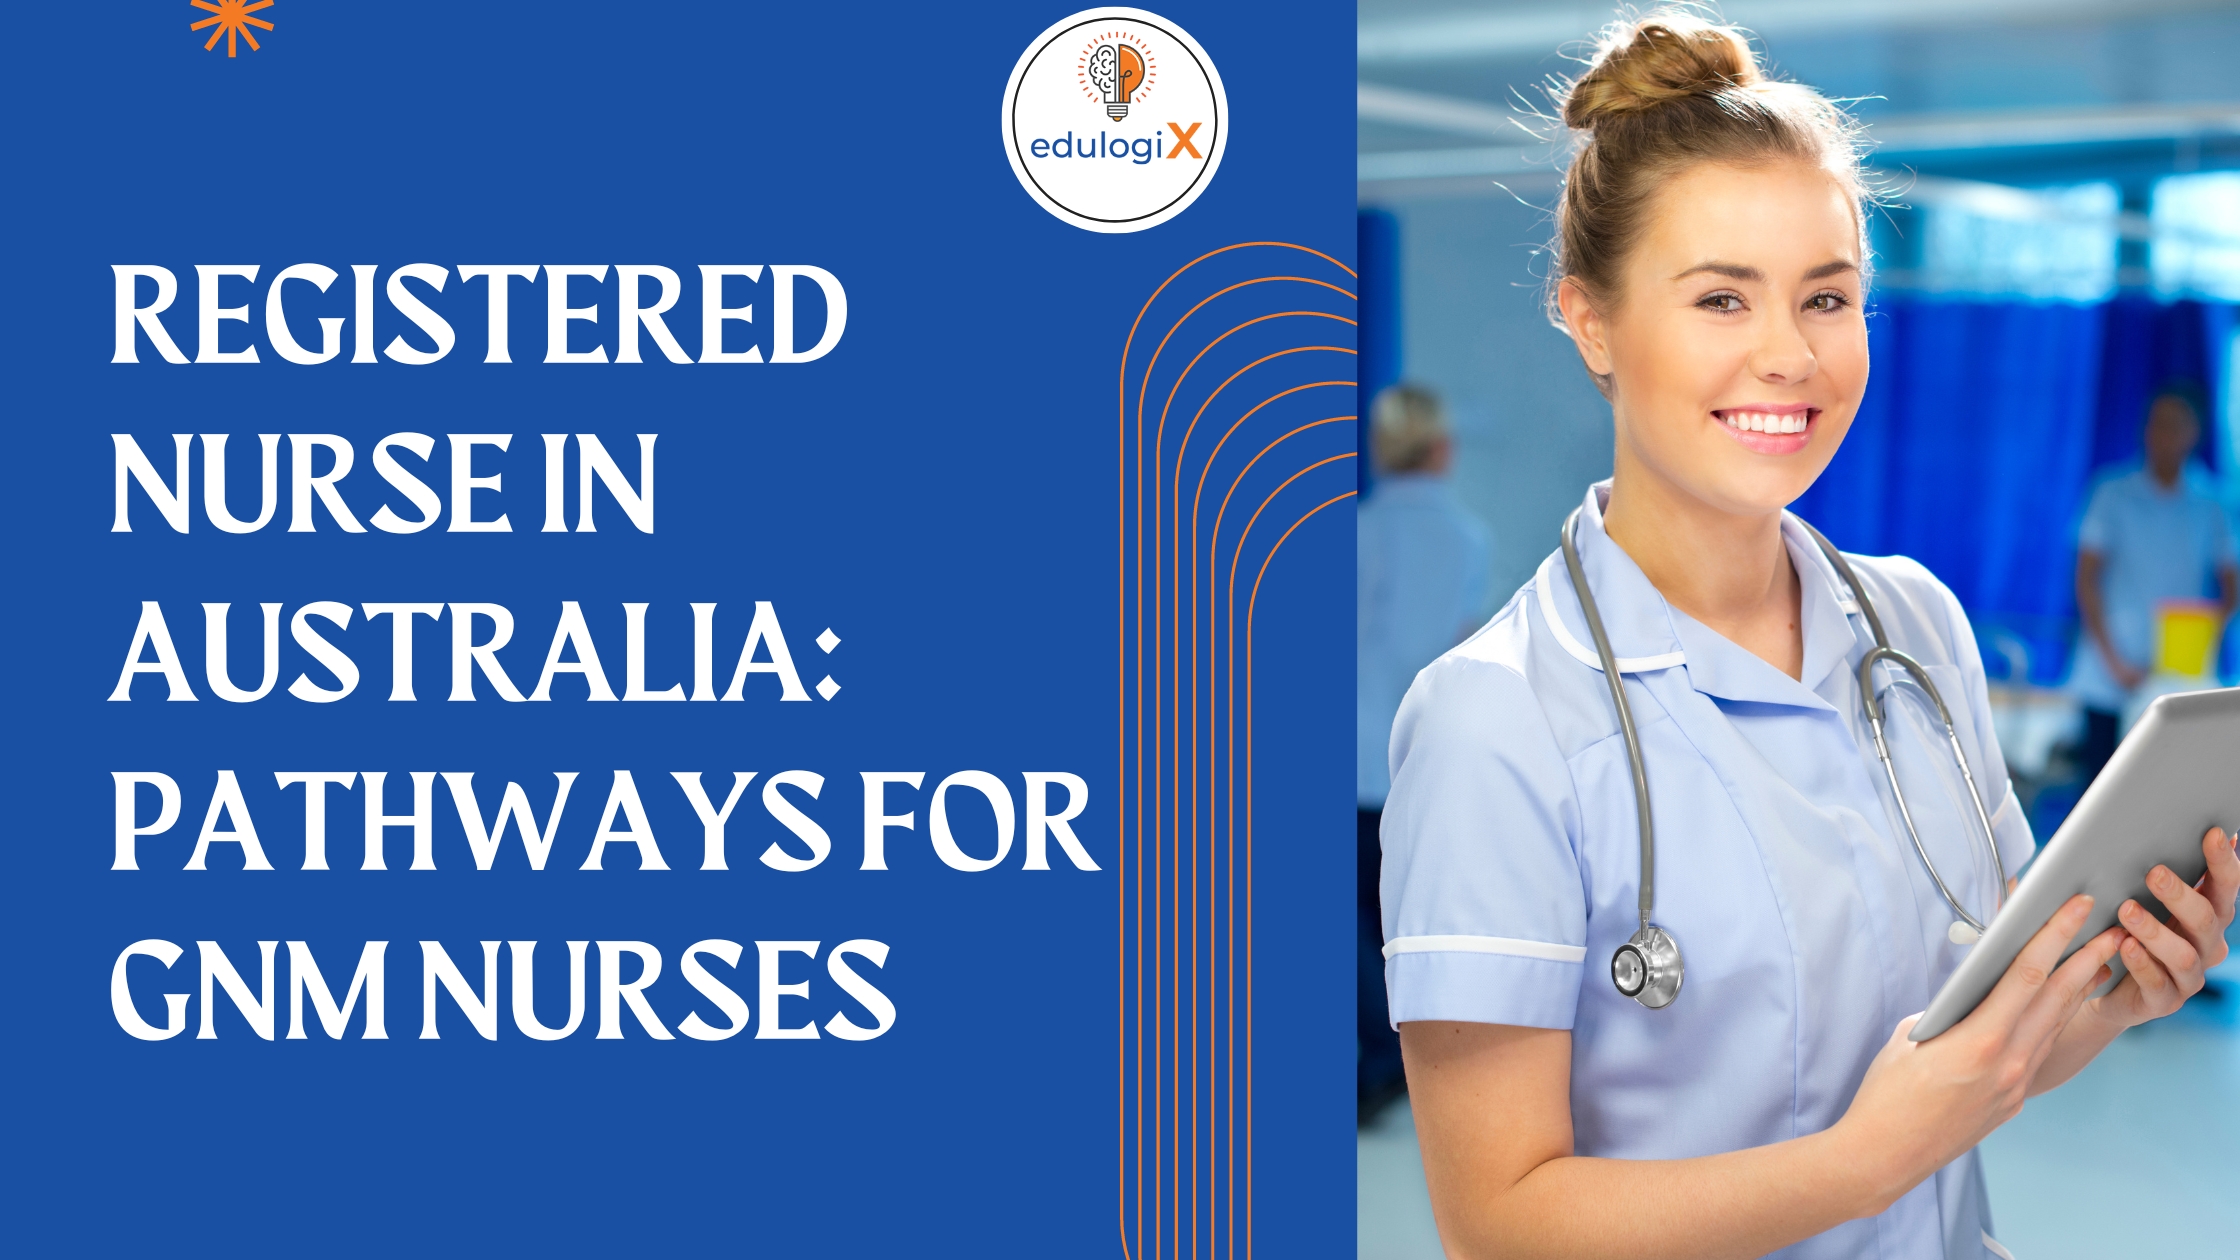 How to Become a Registered Nurse in Australia: Pathways for GNM Nurses